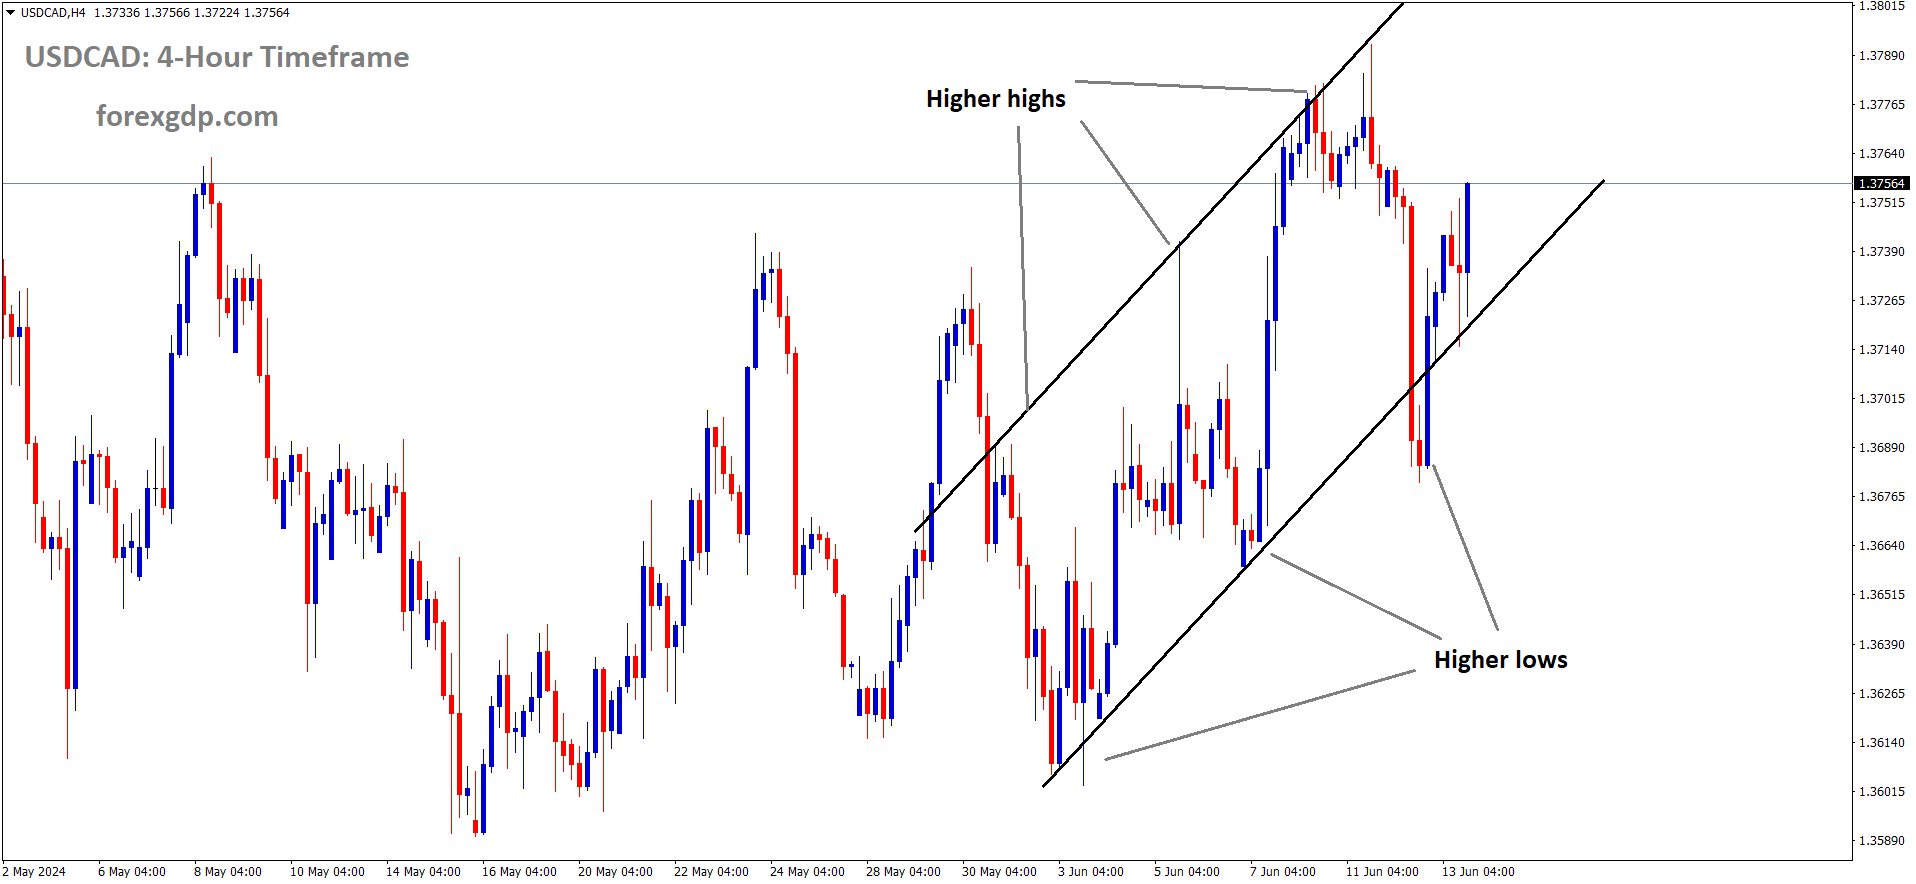 USDCAD is moving in Ascending channel and market has rebounded from the higher low area of the channel